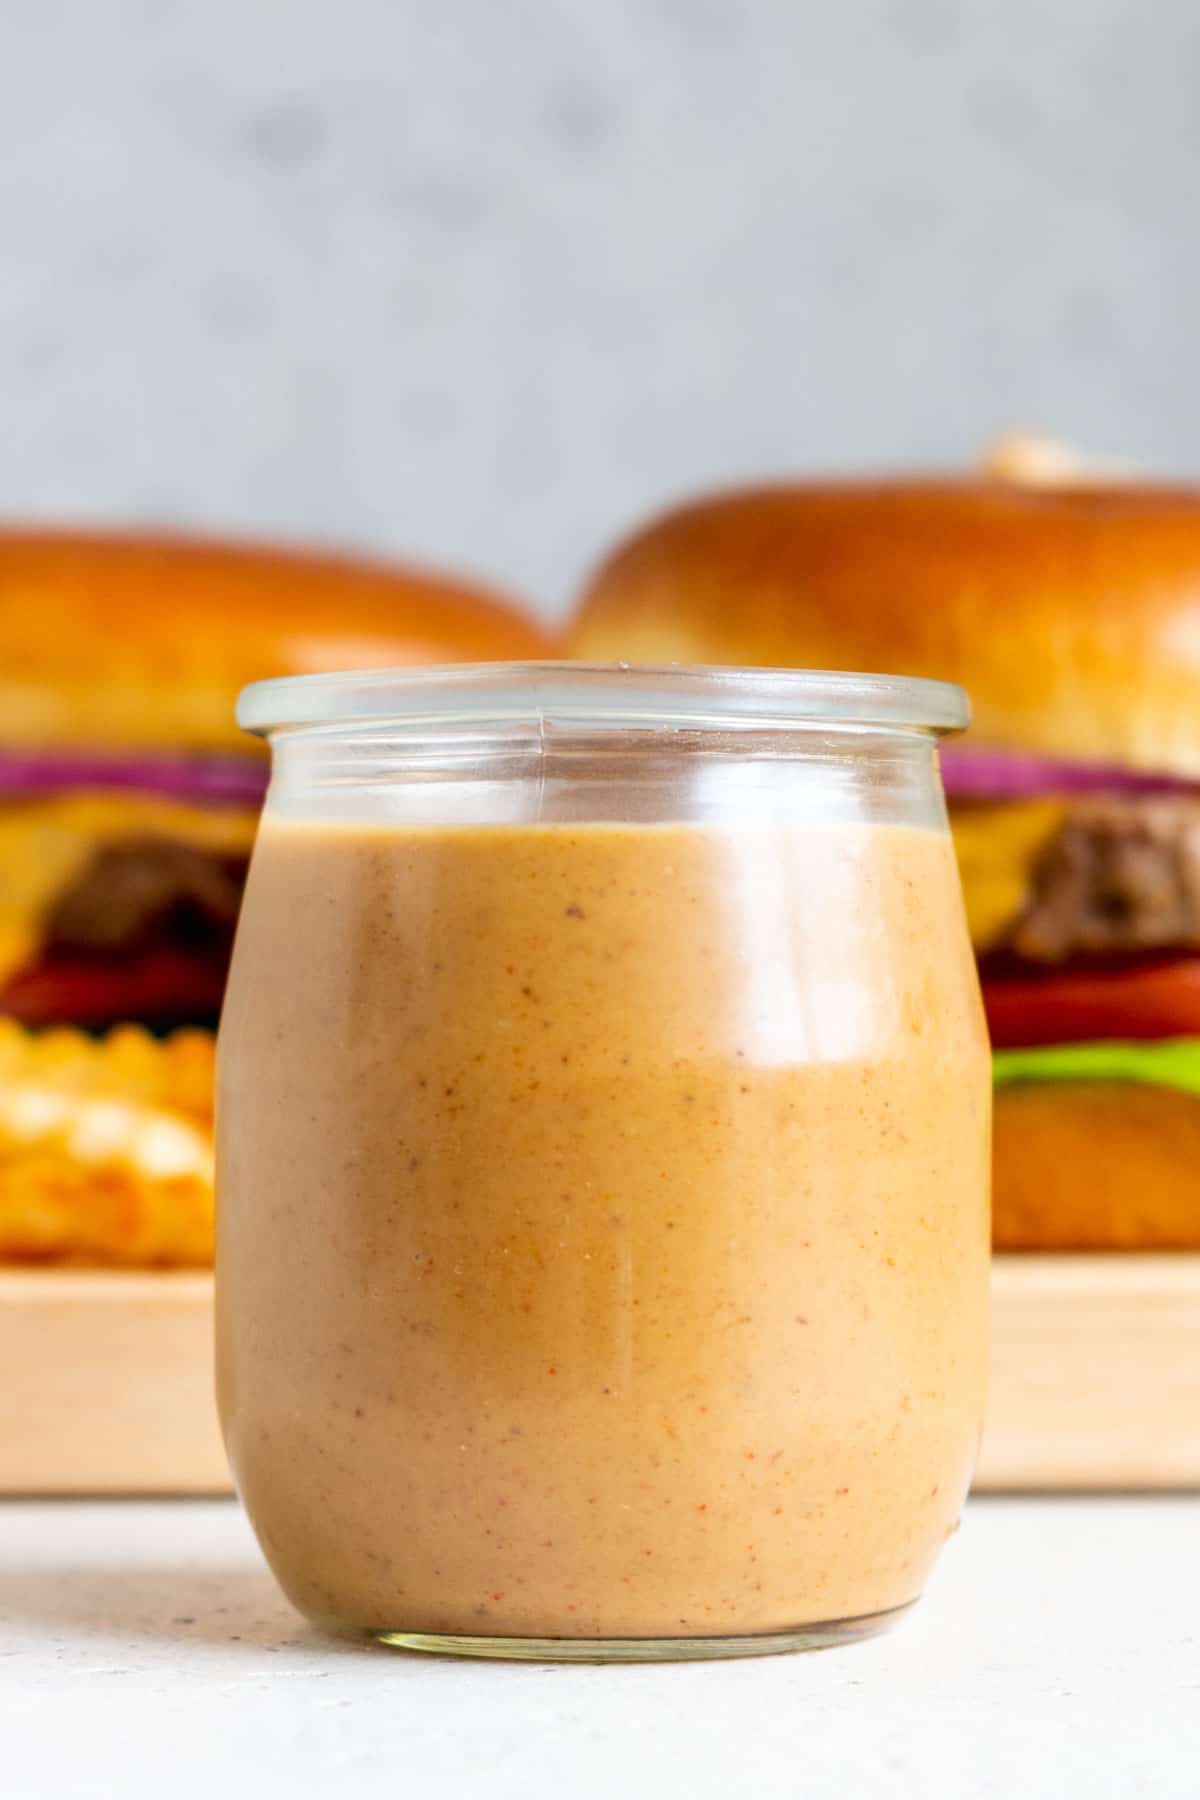 A small jar of burger sauce in front of burgers.